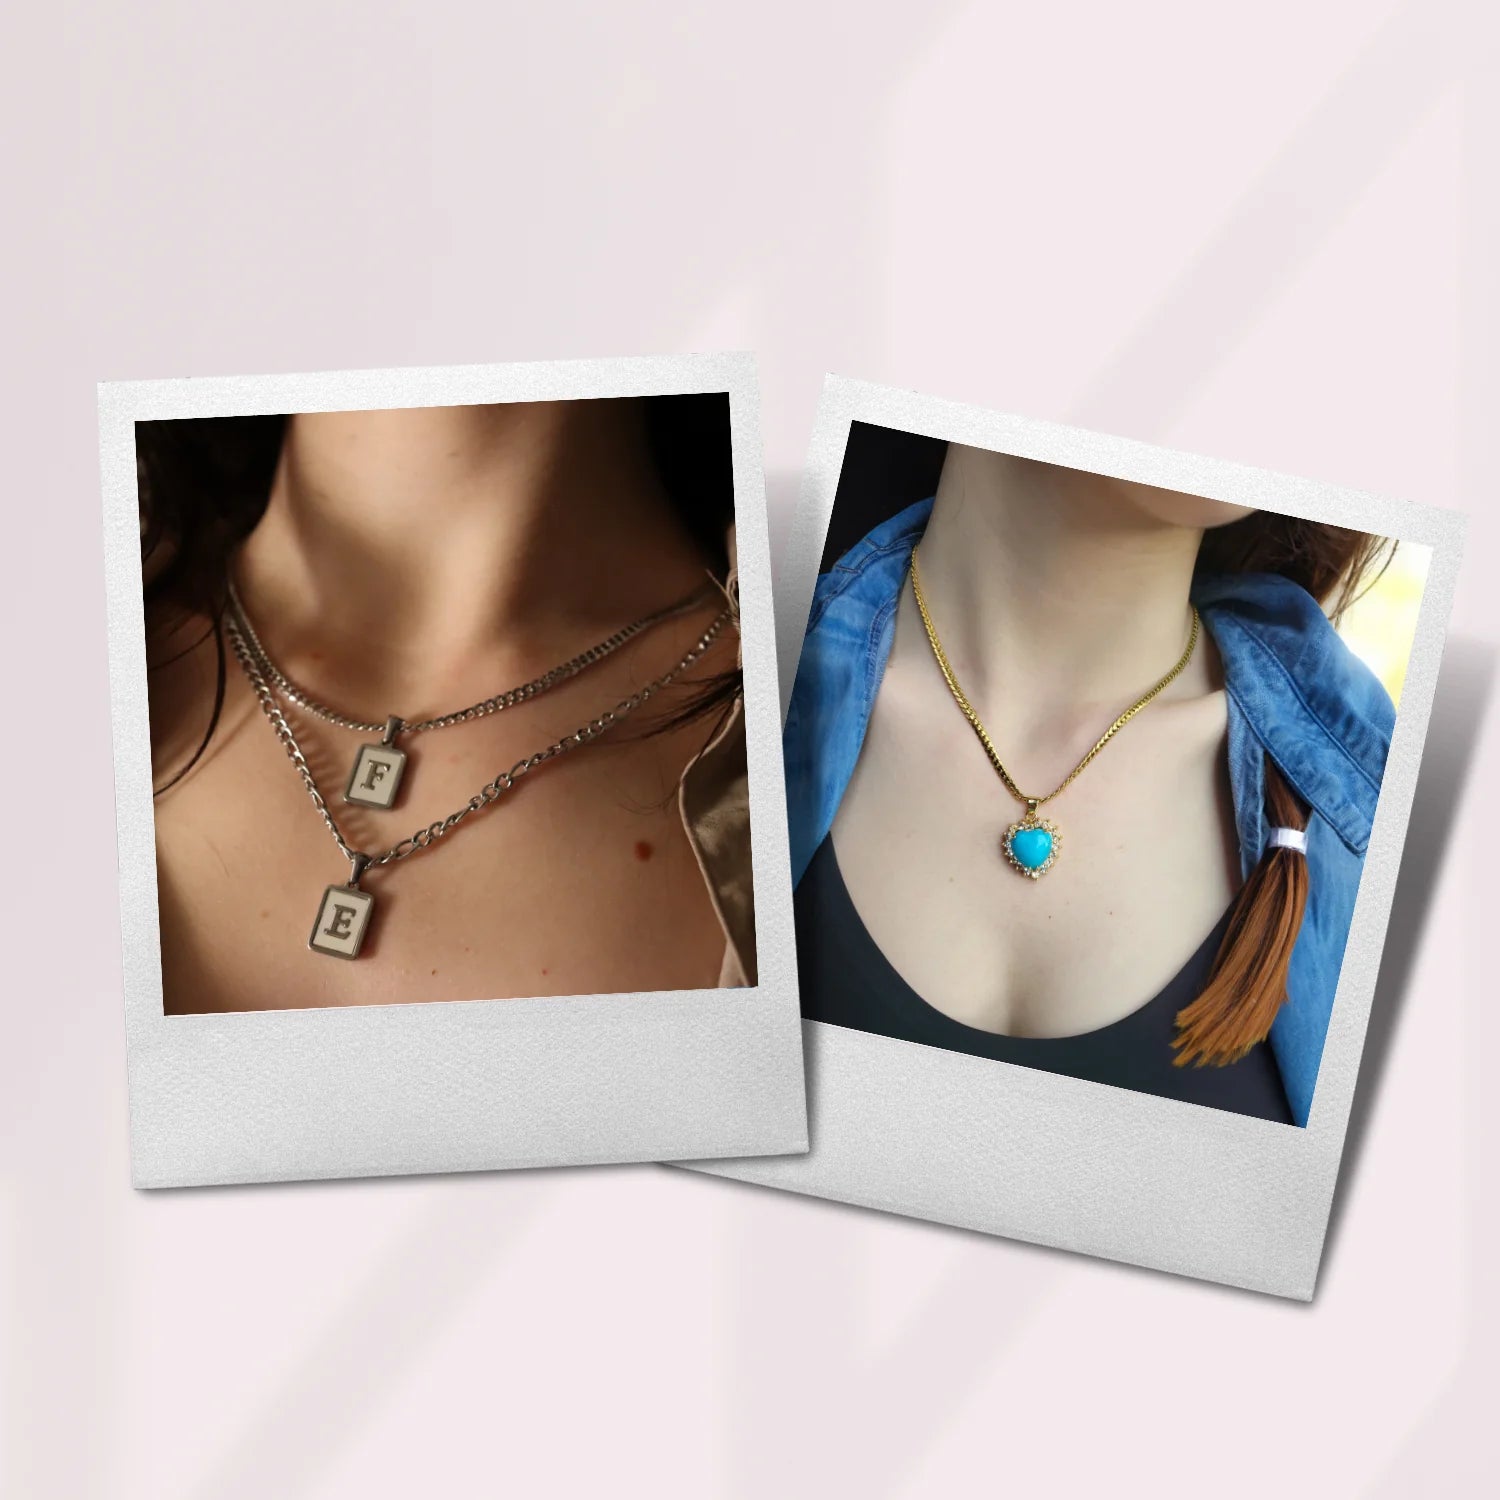 Pictures of 2 women wearing necklaces. On the left is the custom initial necklace, on the right it's heart shaped jade necklace. Image represents jewelry pieces under $50.